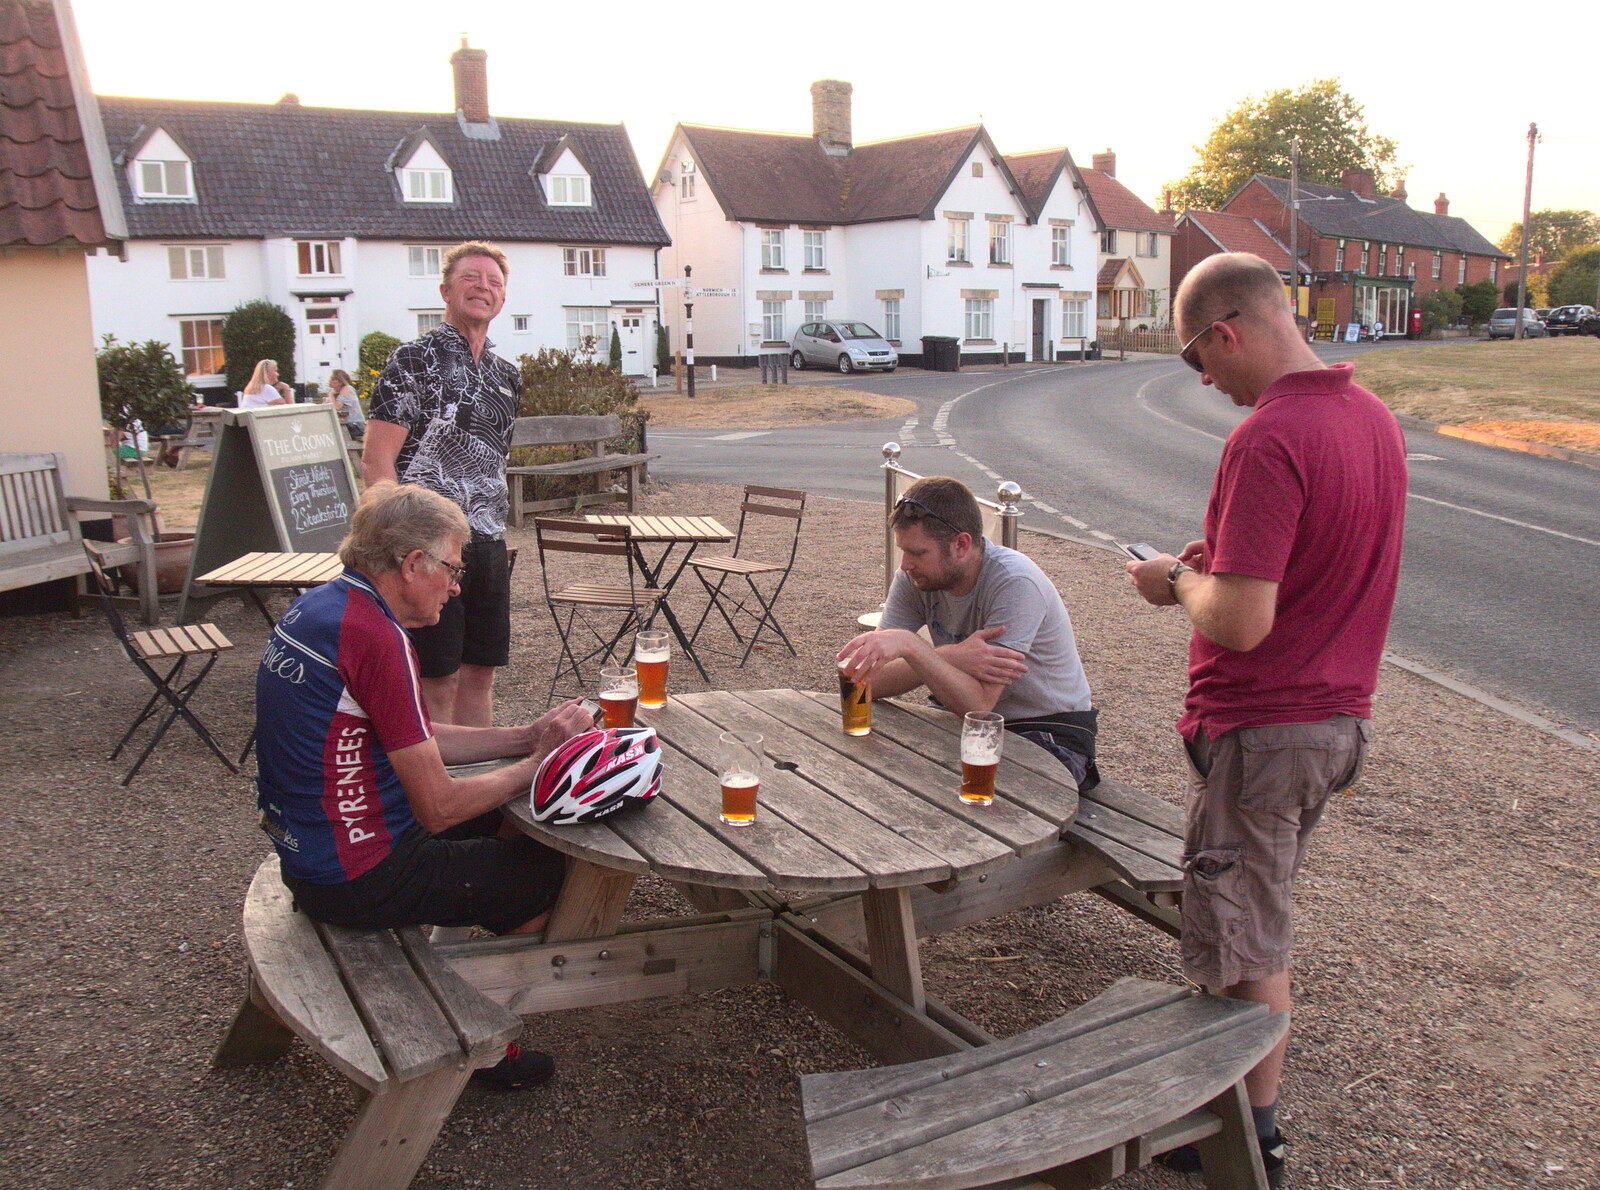 The BSCC at The Crown and Hot Summer Days, Diss, Pulham and London - 24th July 2018: Gaz grins as we drink beer outside the Crown